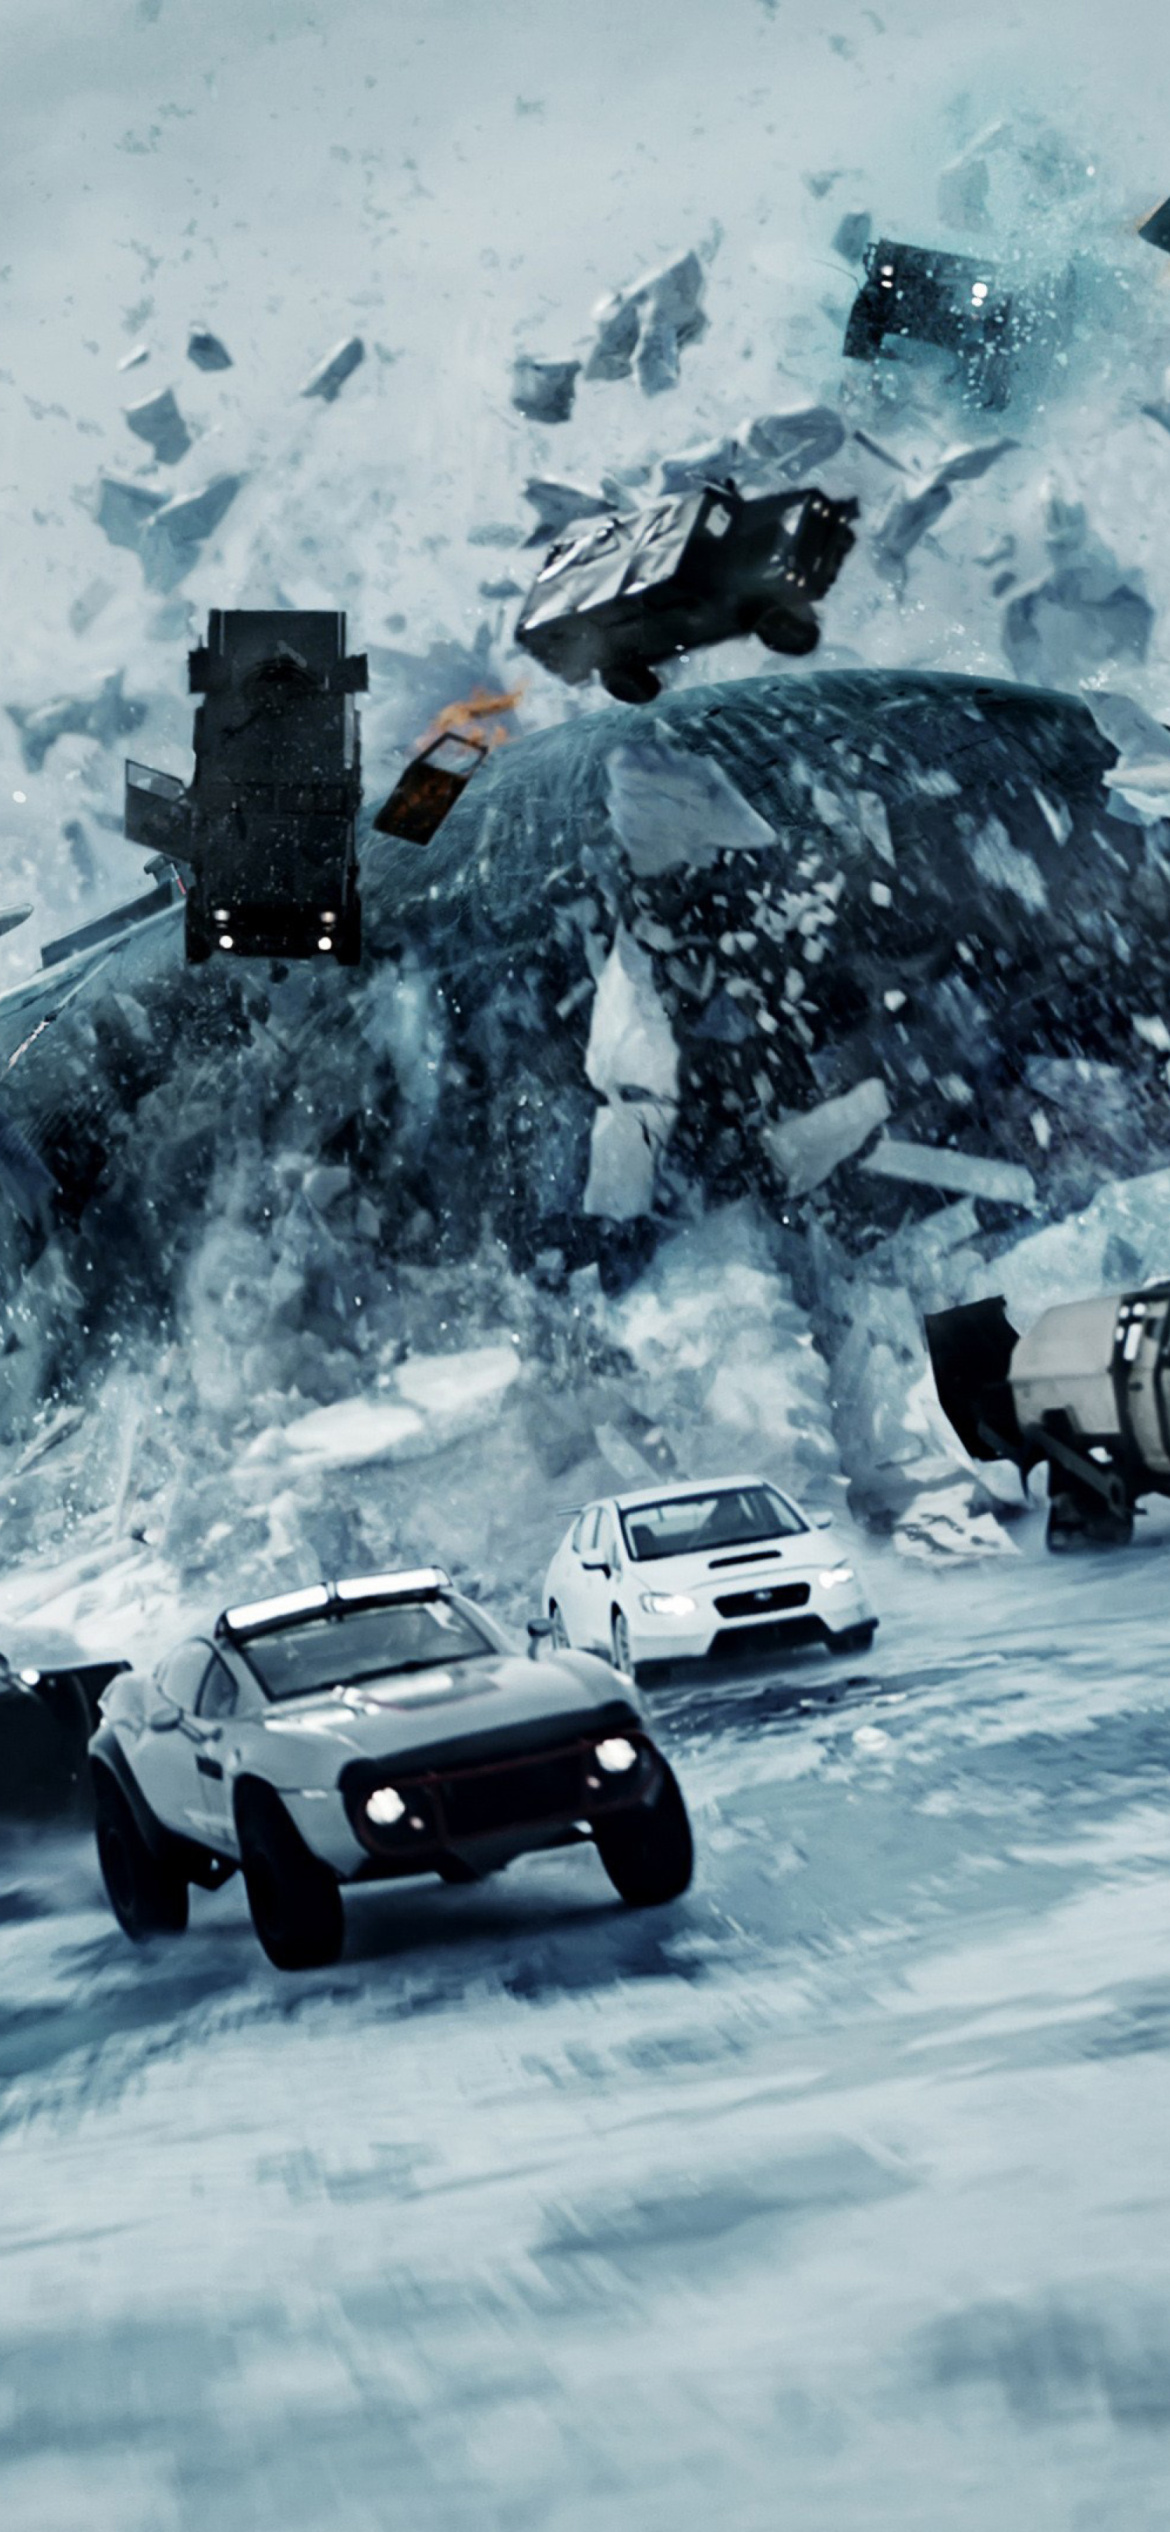 The Fate of the Furious 2017 Film wallpaper 1170x2532